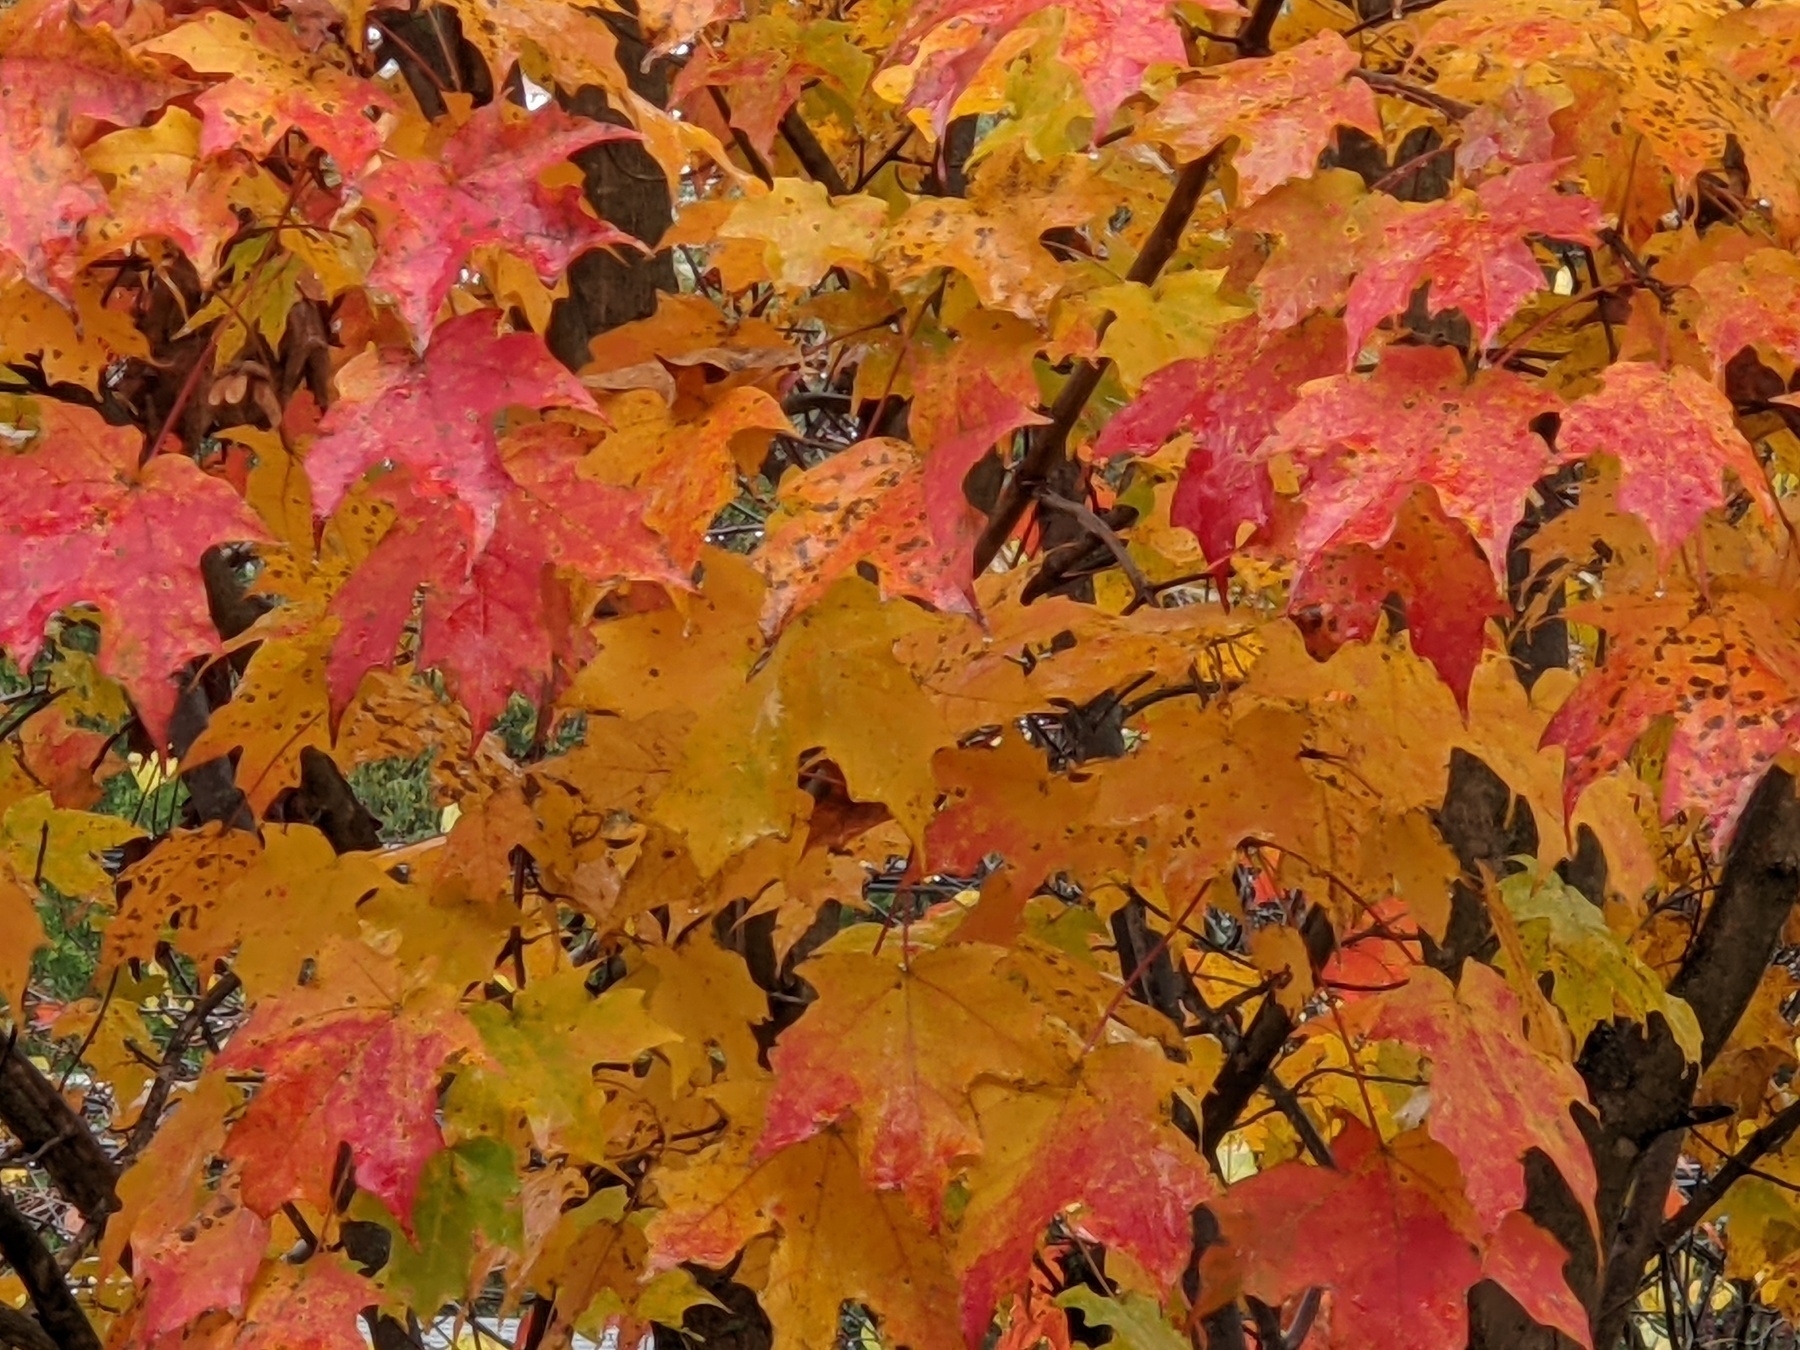 close-up of leaves on a sugar maple tree colored red, pink, orange, and yellow